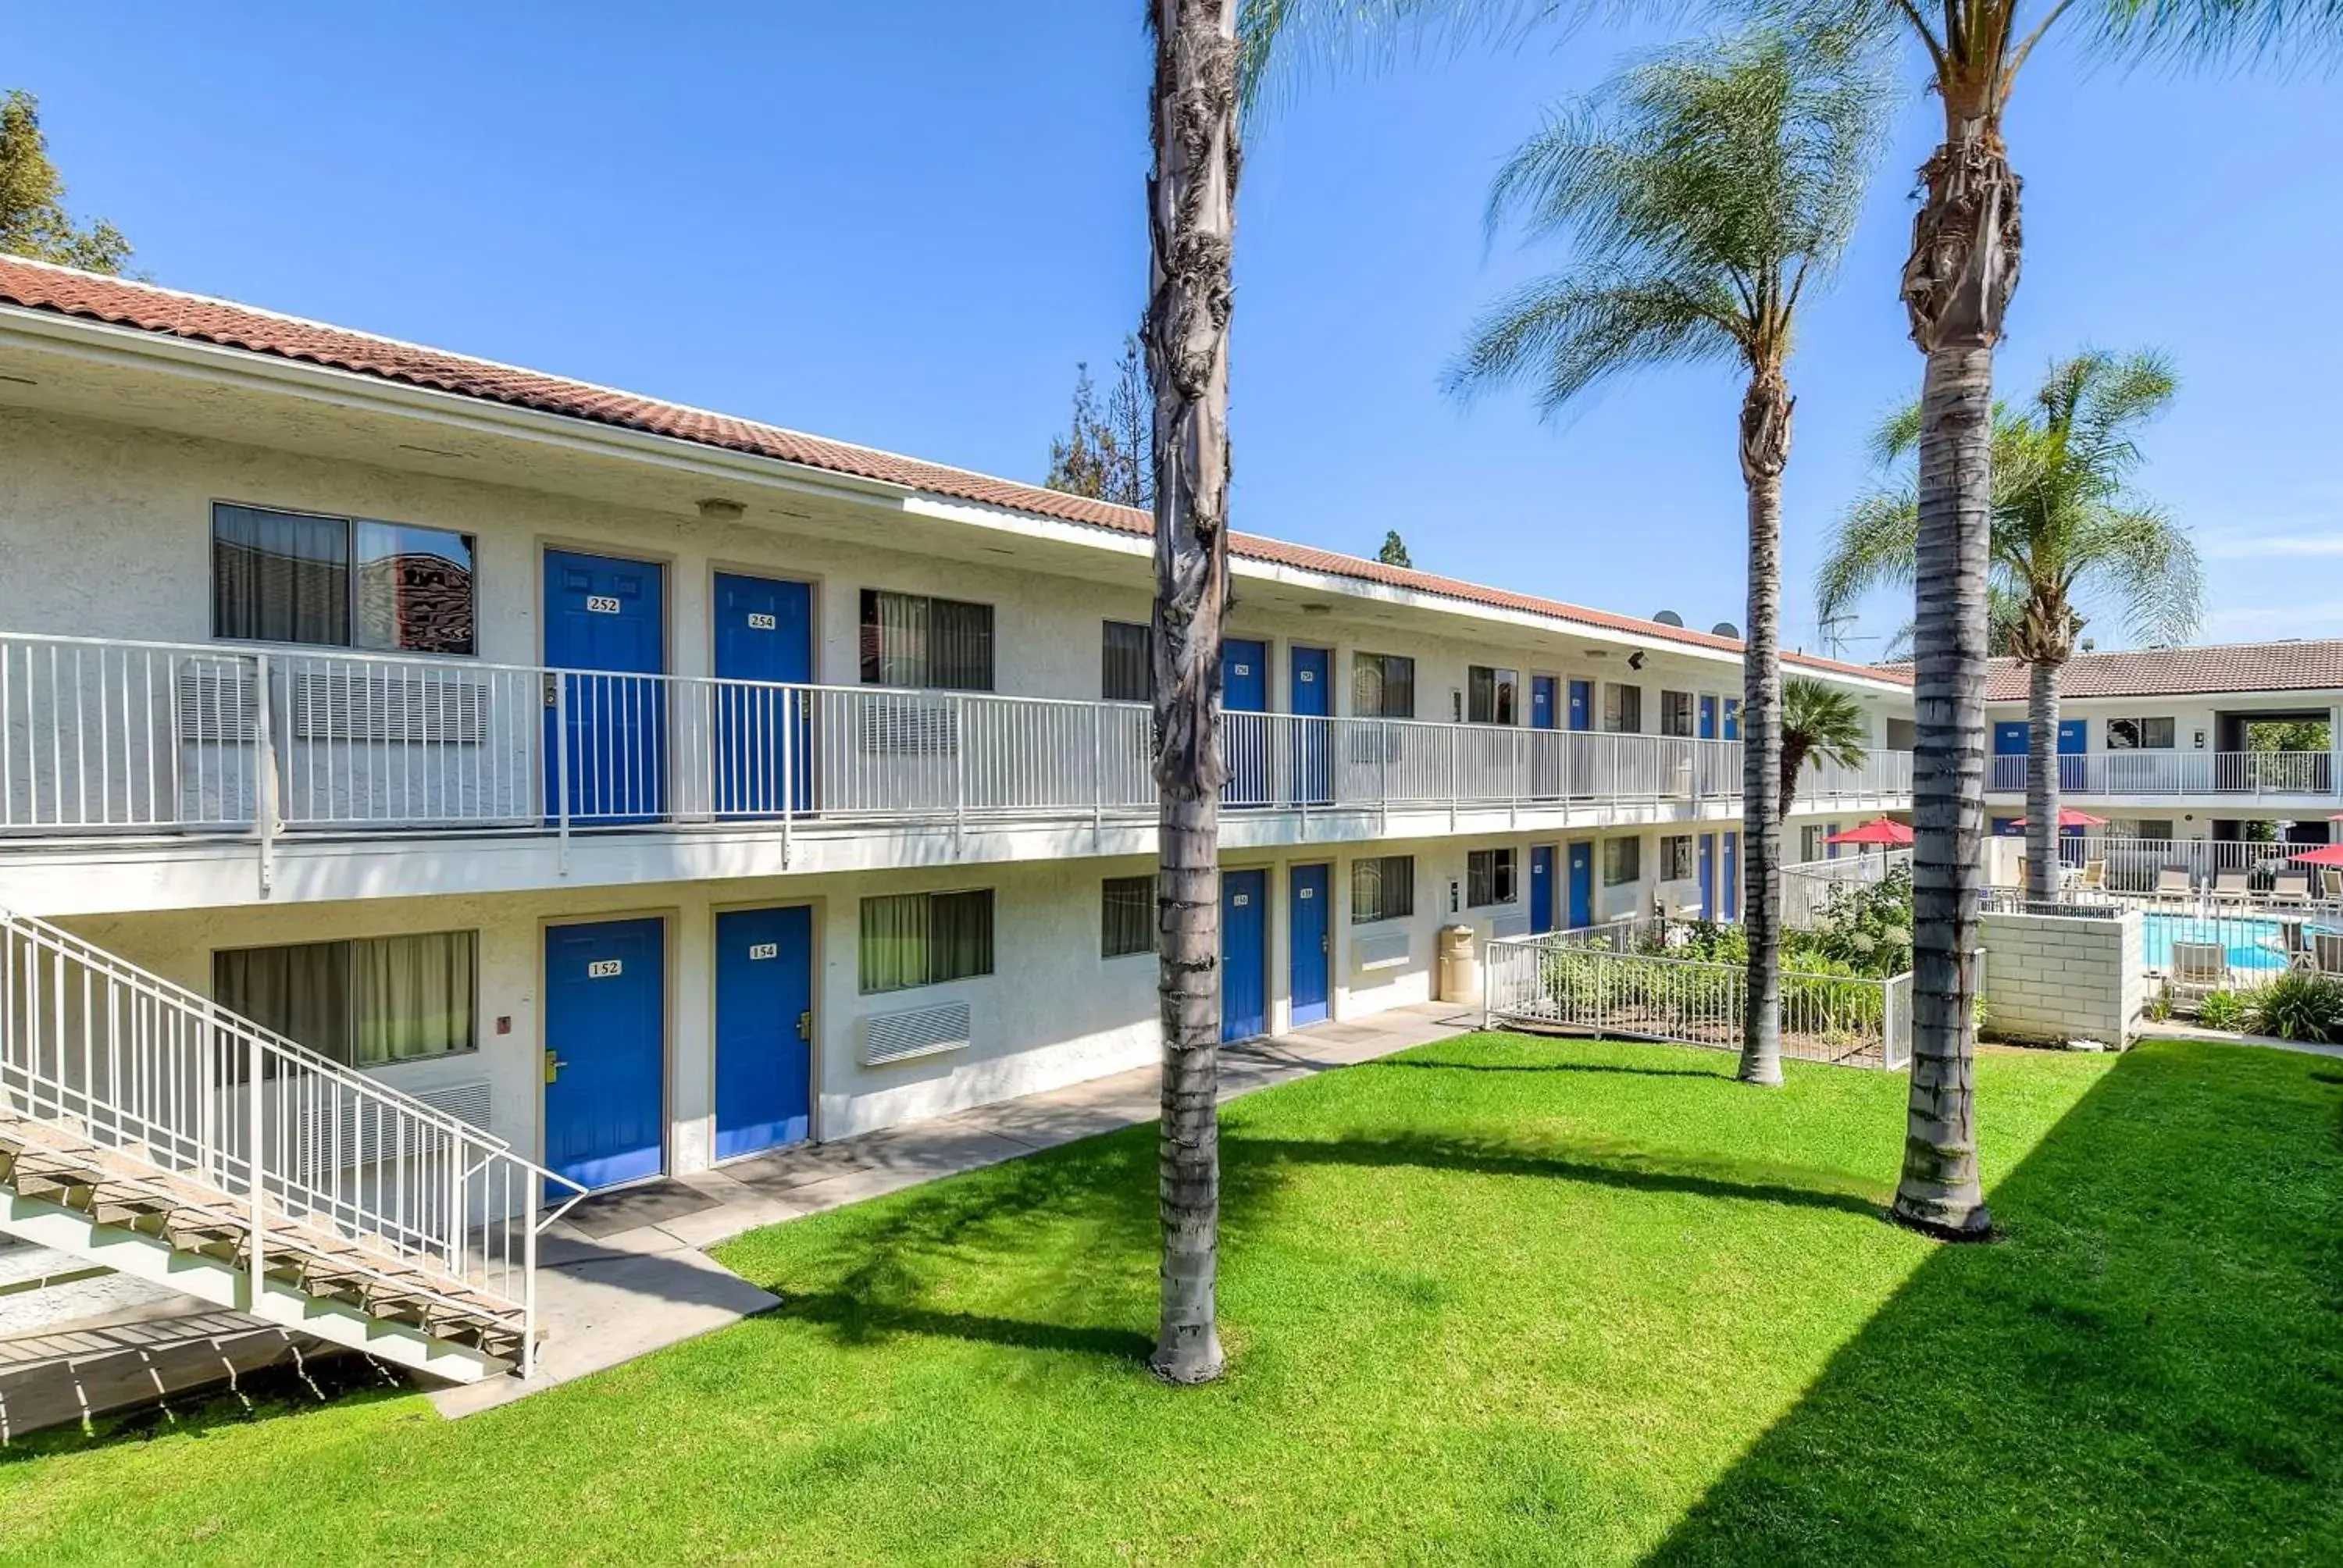 Property Building in Motel 6-Rowland Heights, CA - Los Angeles - Pomona